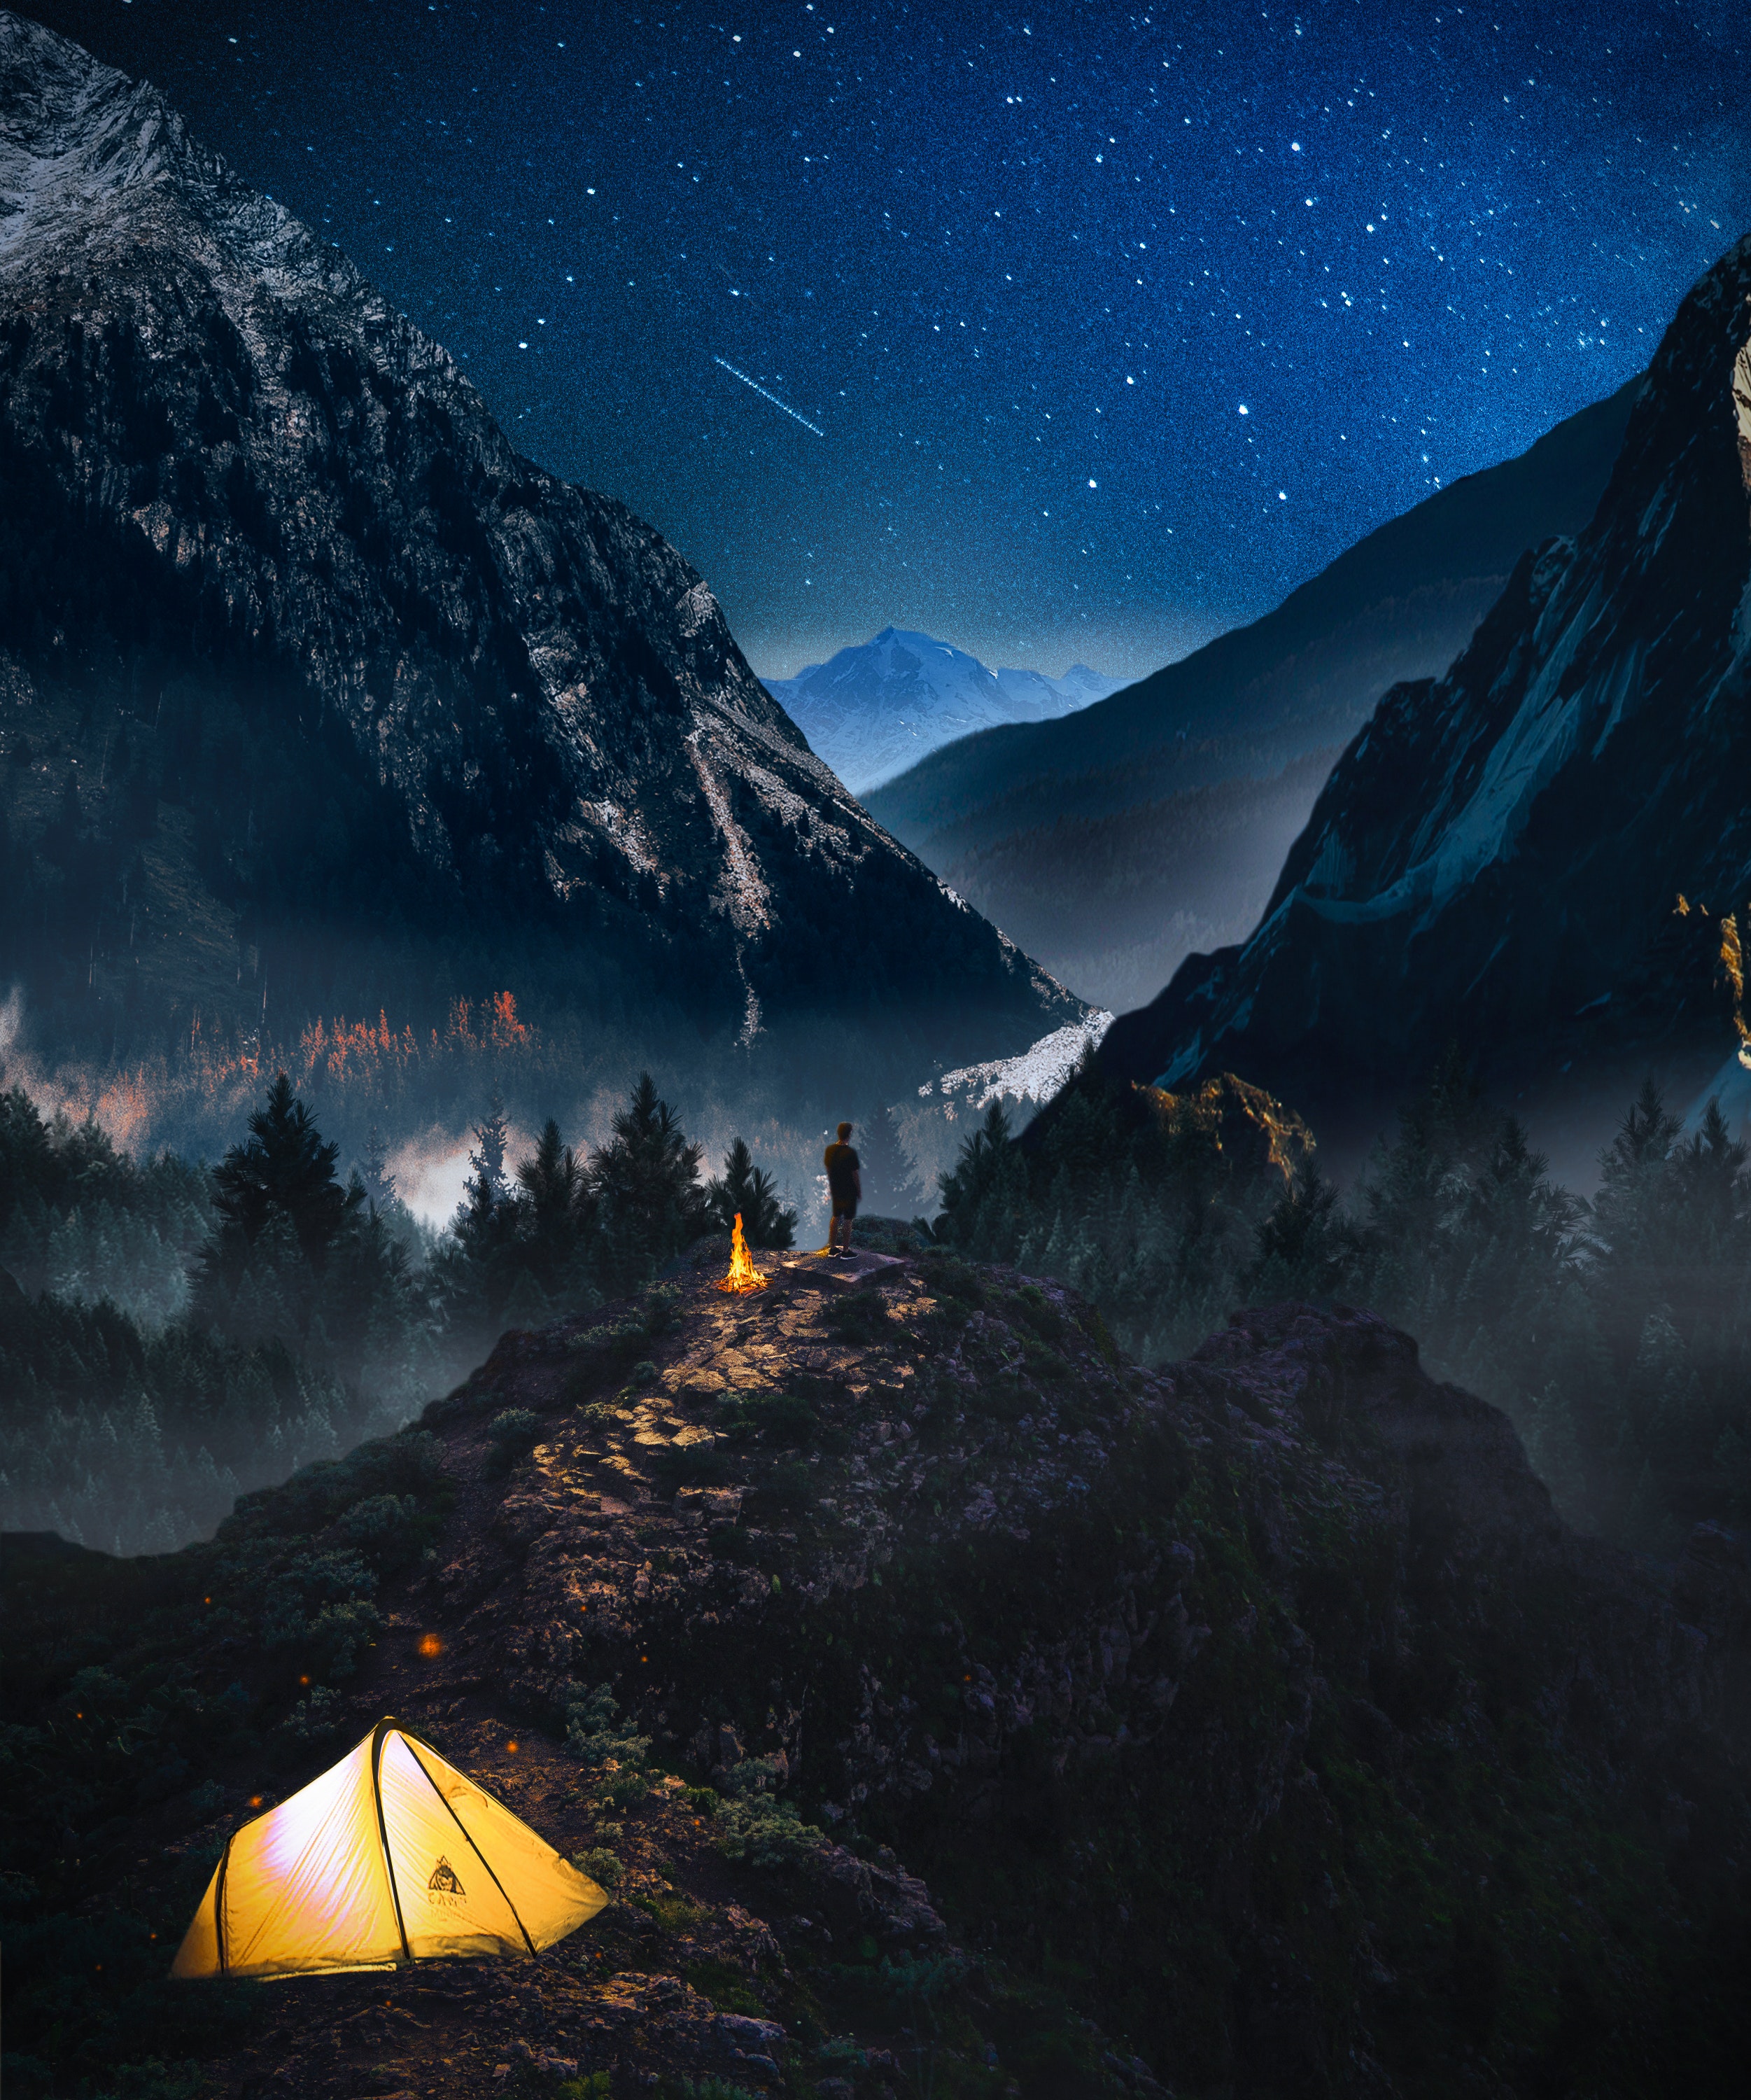 starry sky, camping, campsite, photoshop, loneliness, mountains, nature